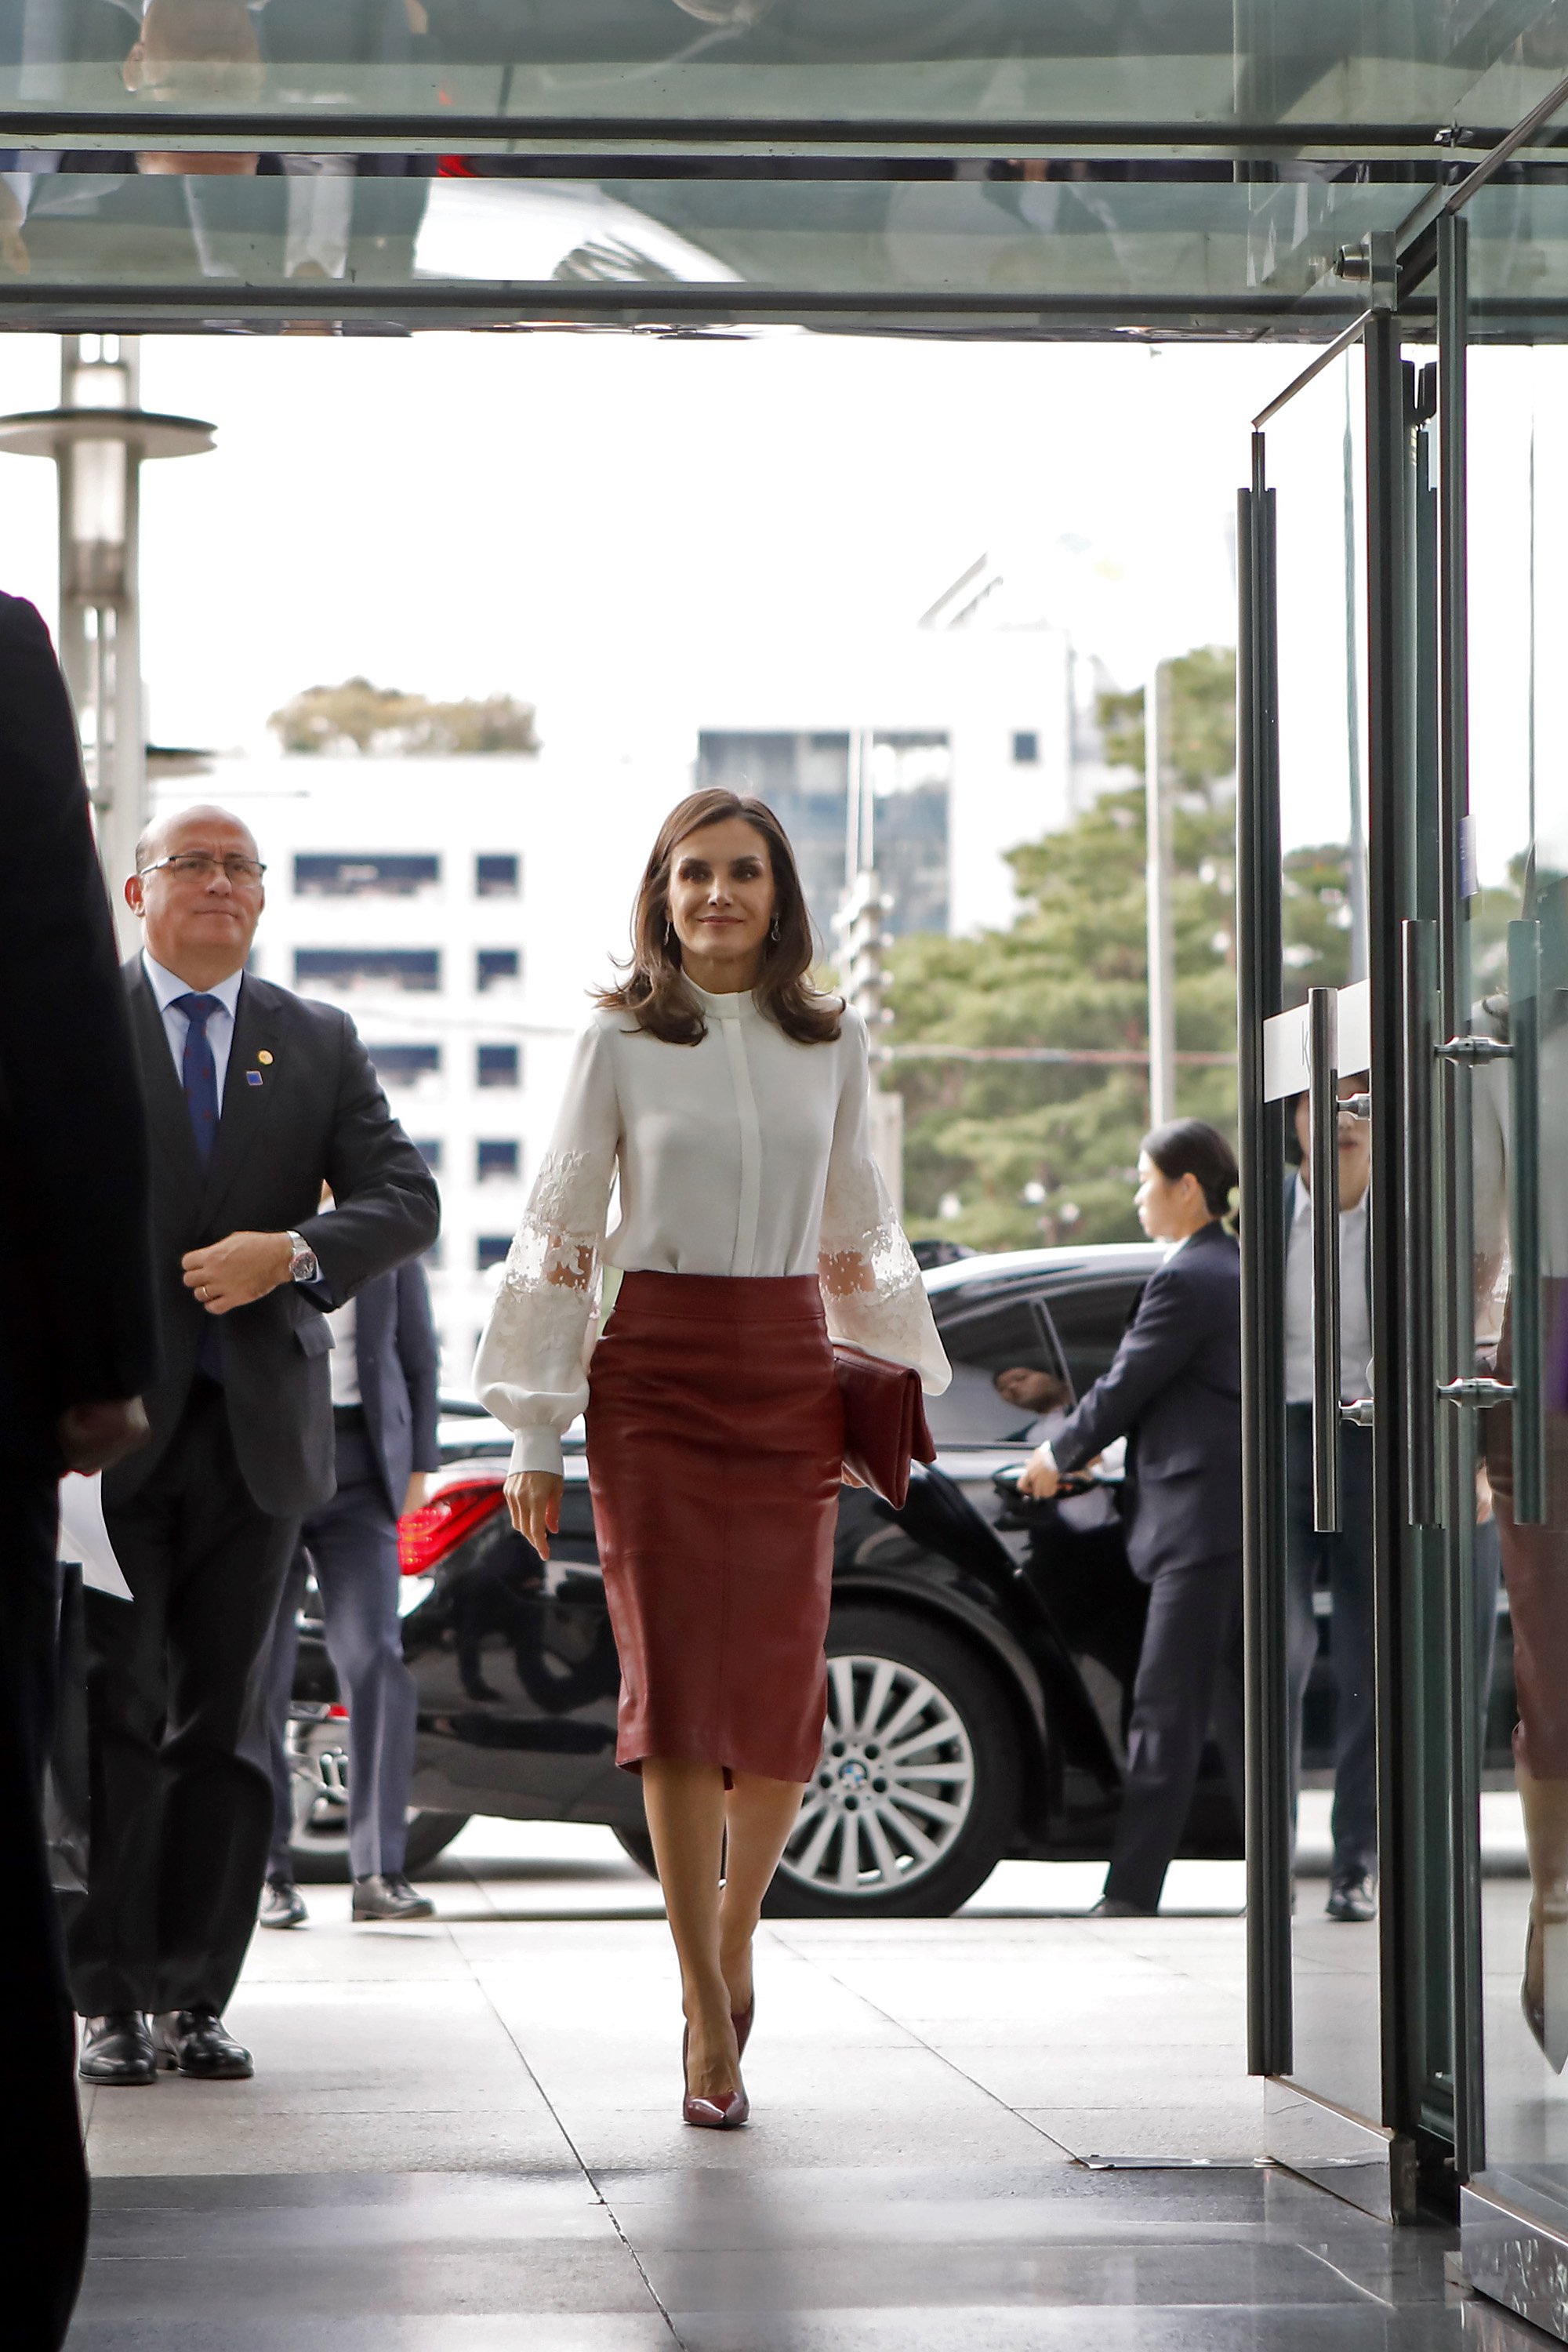 Queen Letizia of Spain arrives at KOTRA, on October 24, 2019 in Seoul, South Korea | Photo: Getty Images